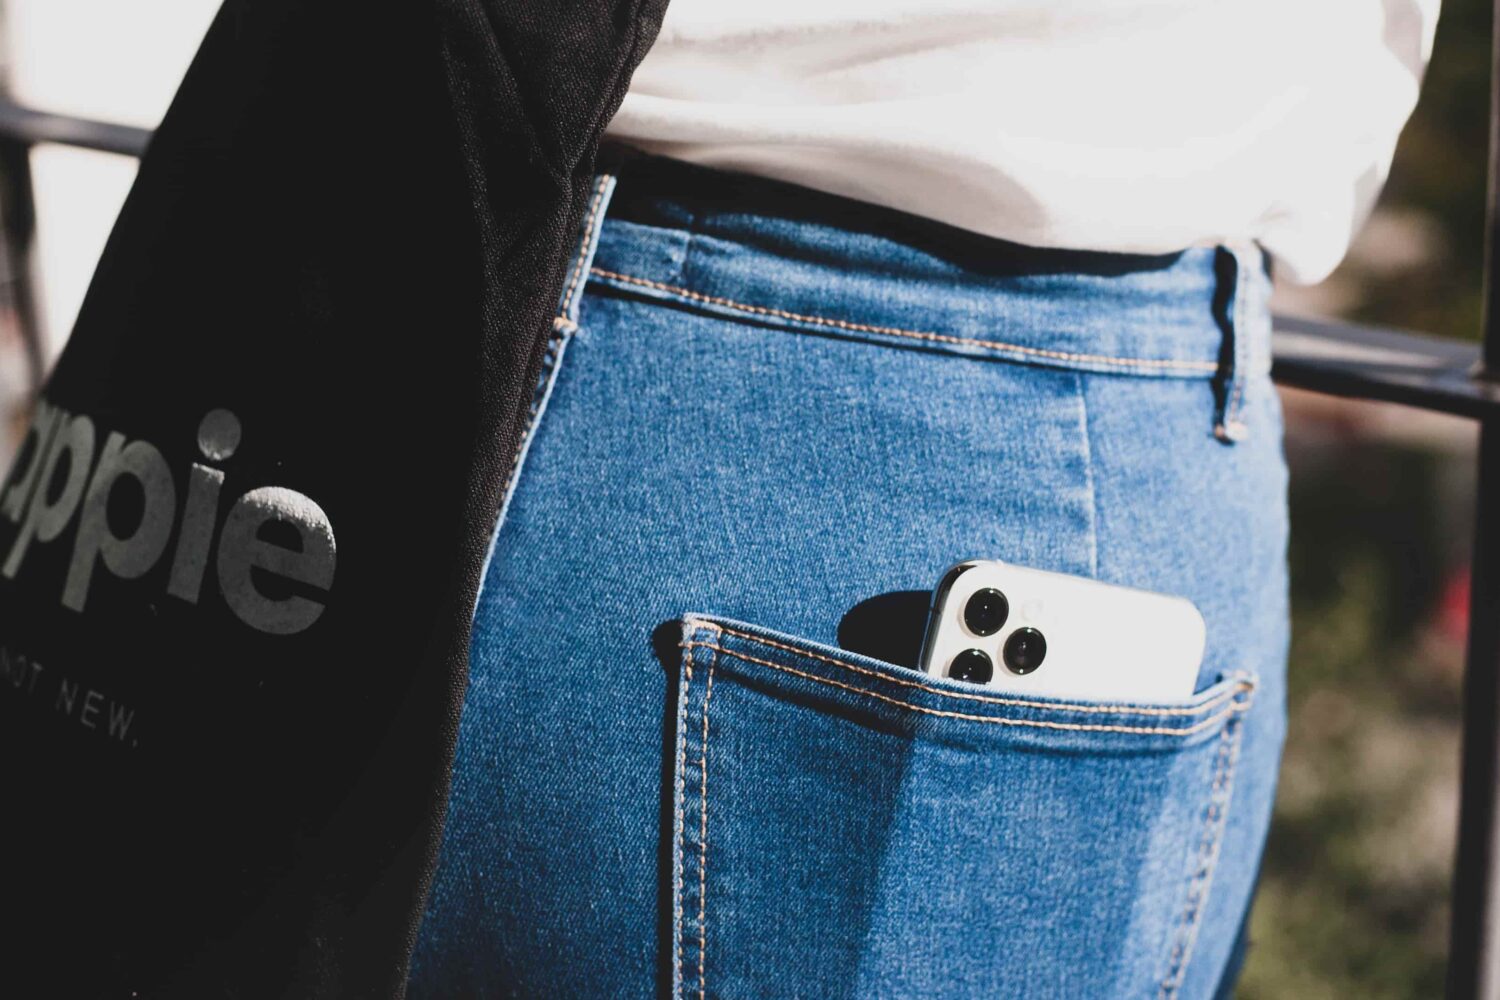 Closeup of a woman's back jeans pocket with a white Apple iPhone 13 Pro inside